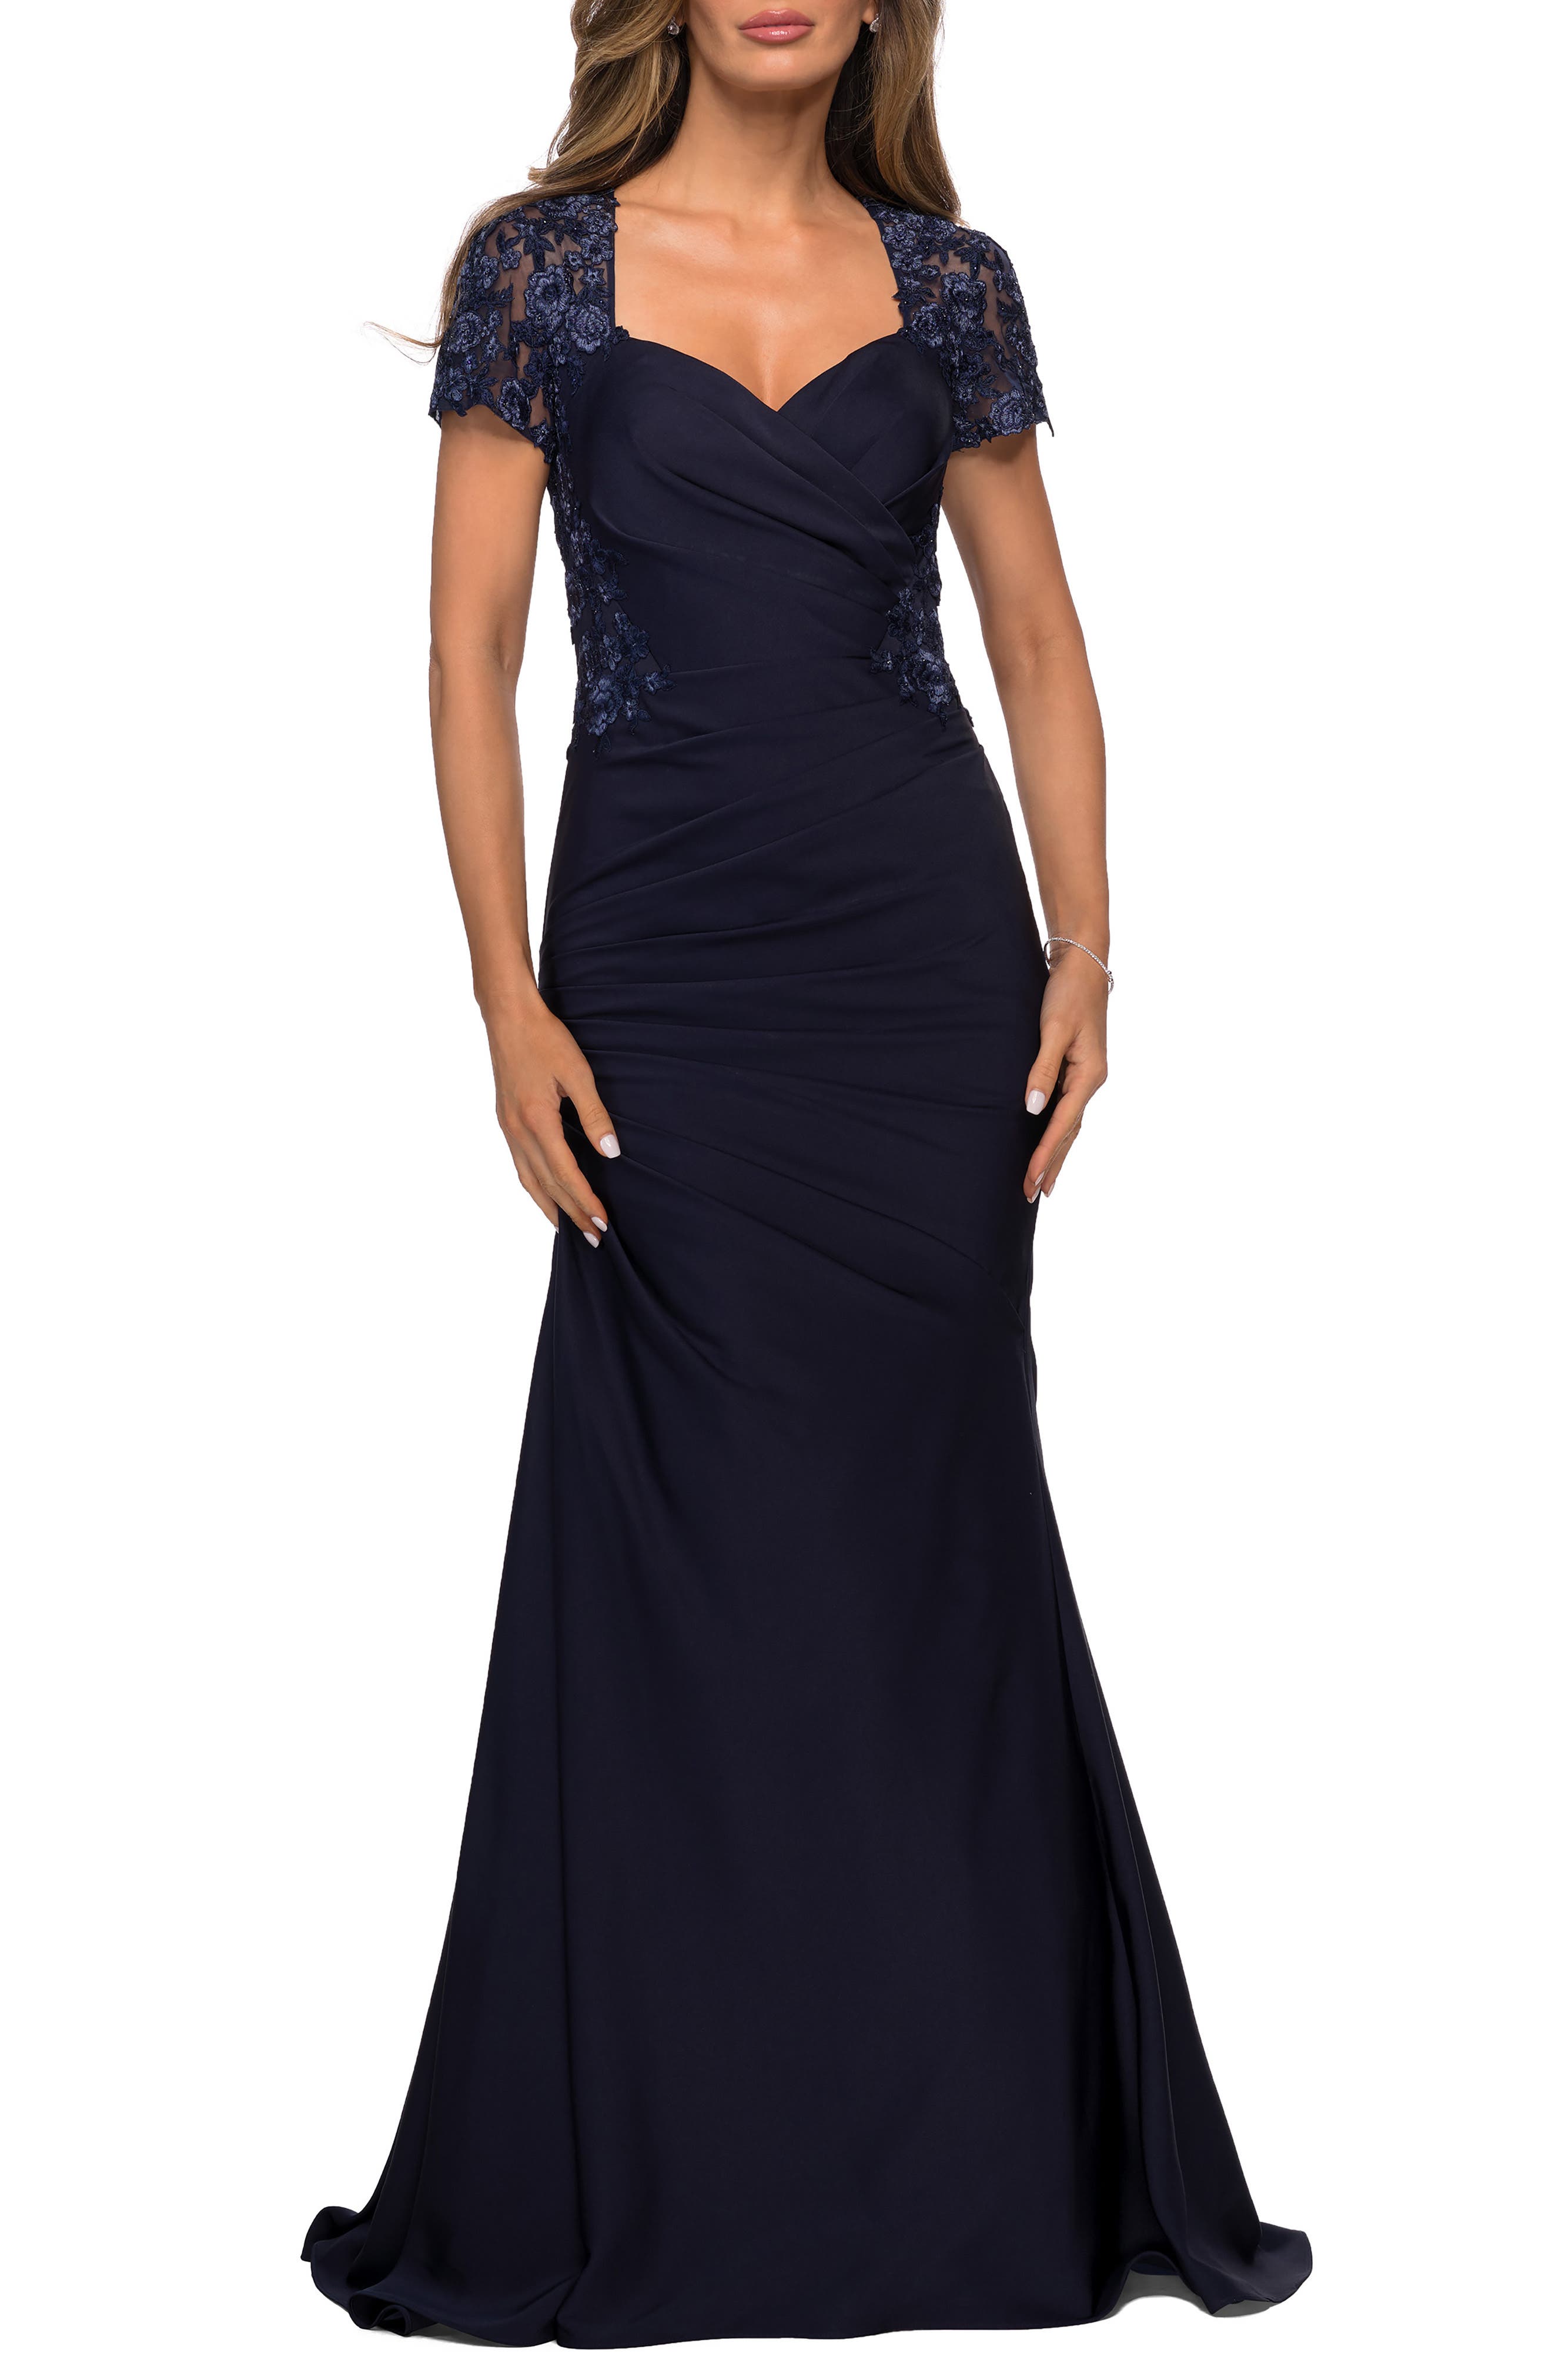 Blue Mother of the Bride Dresses ...